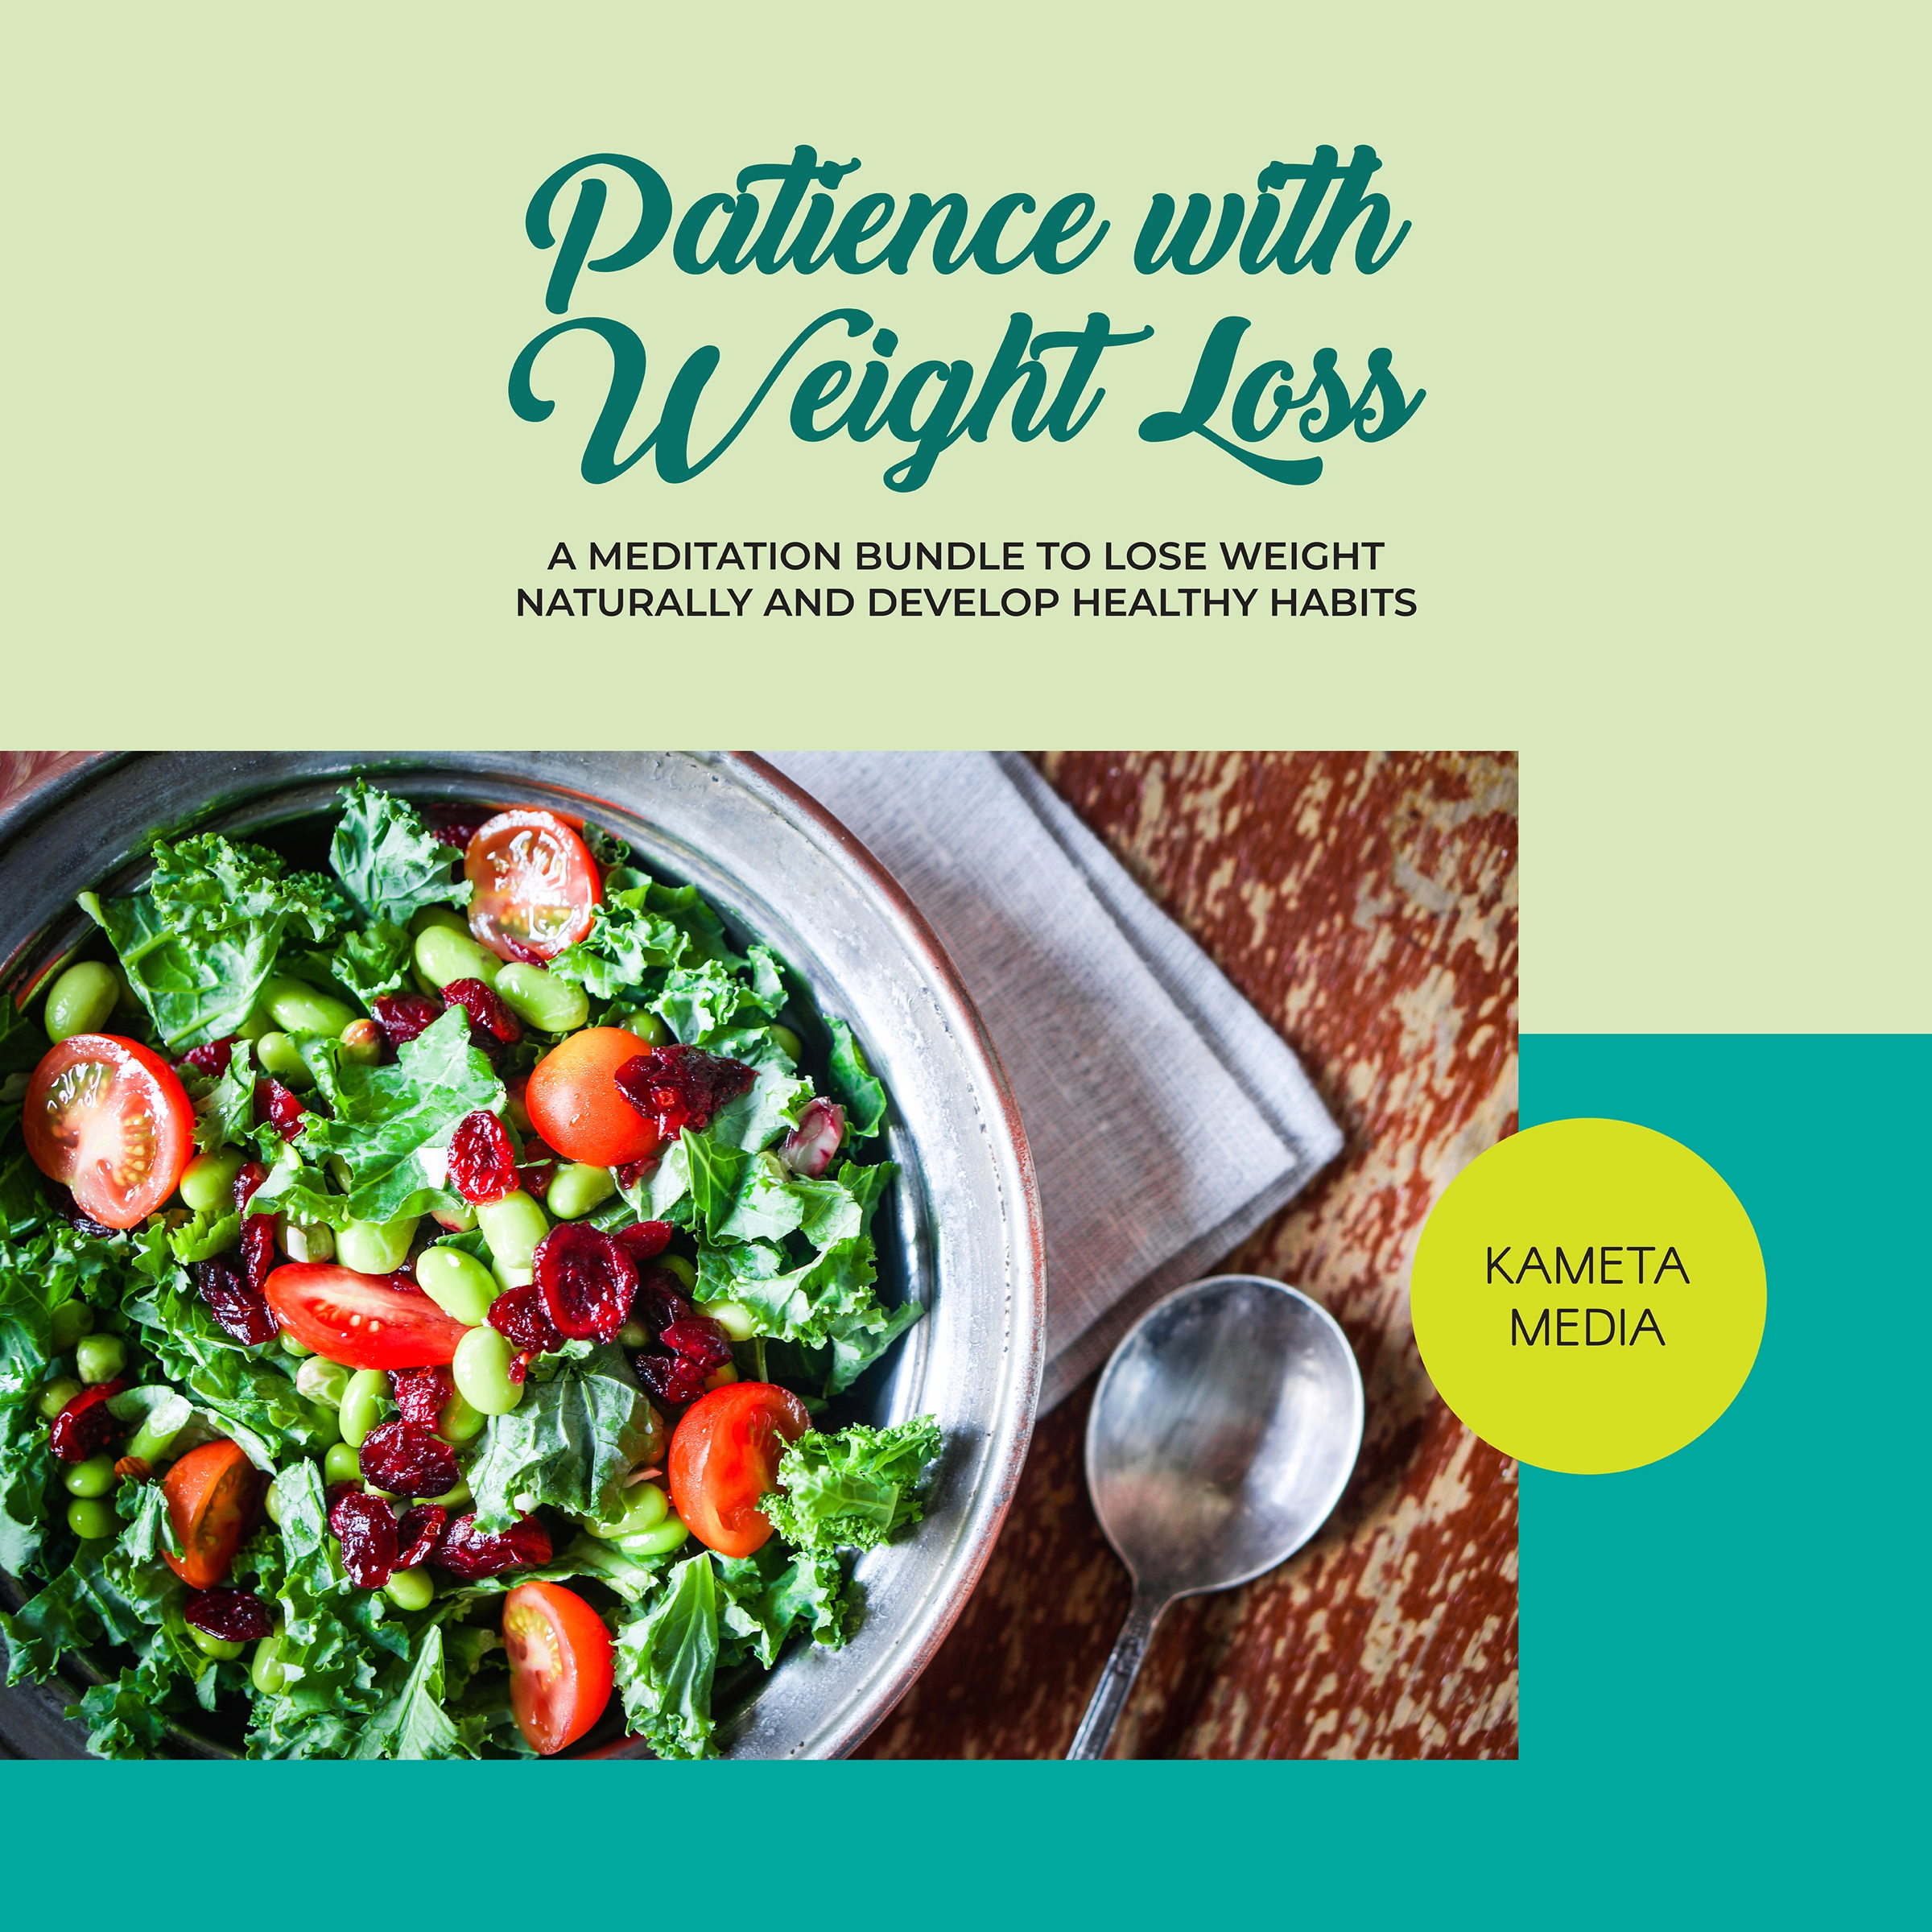 Patience with Weight Loss: A Meditation Bundle to Lose Weight Naturally and Develop Healthy Habits Audiobook by Kameta Media